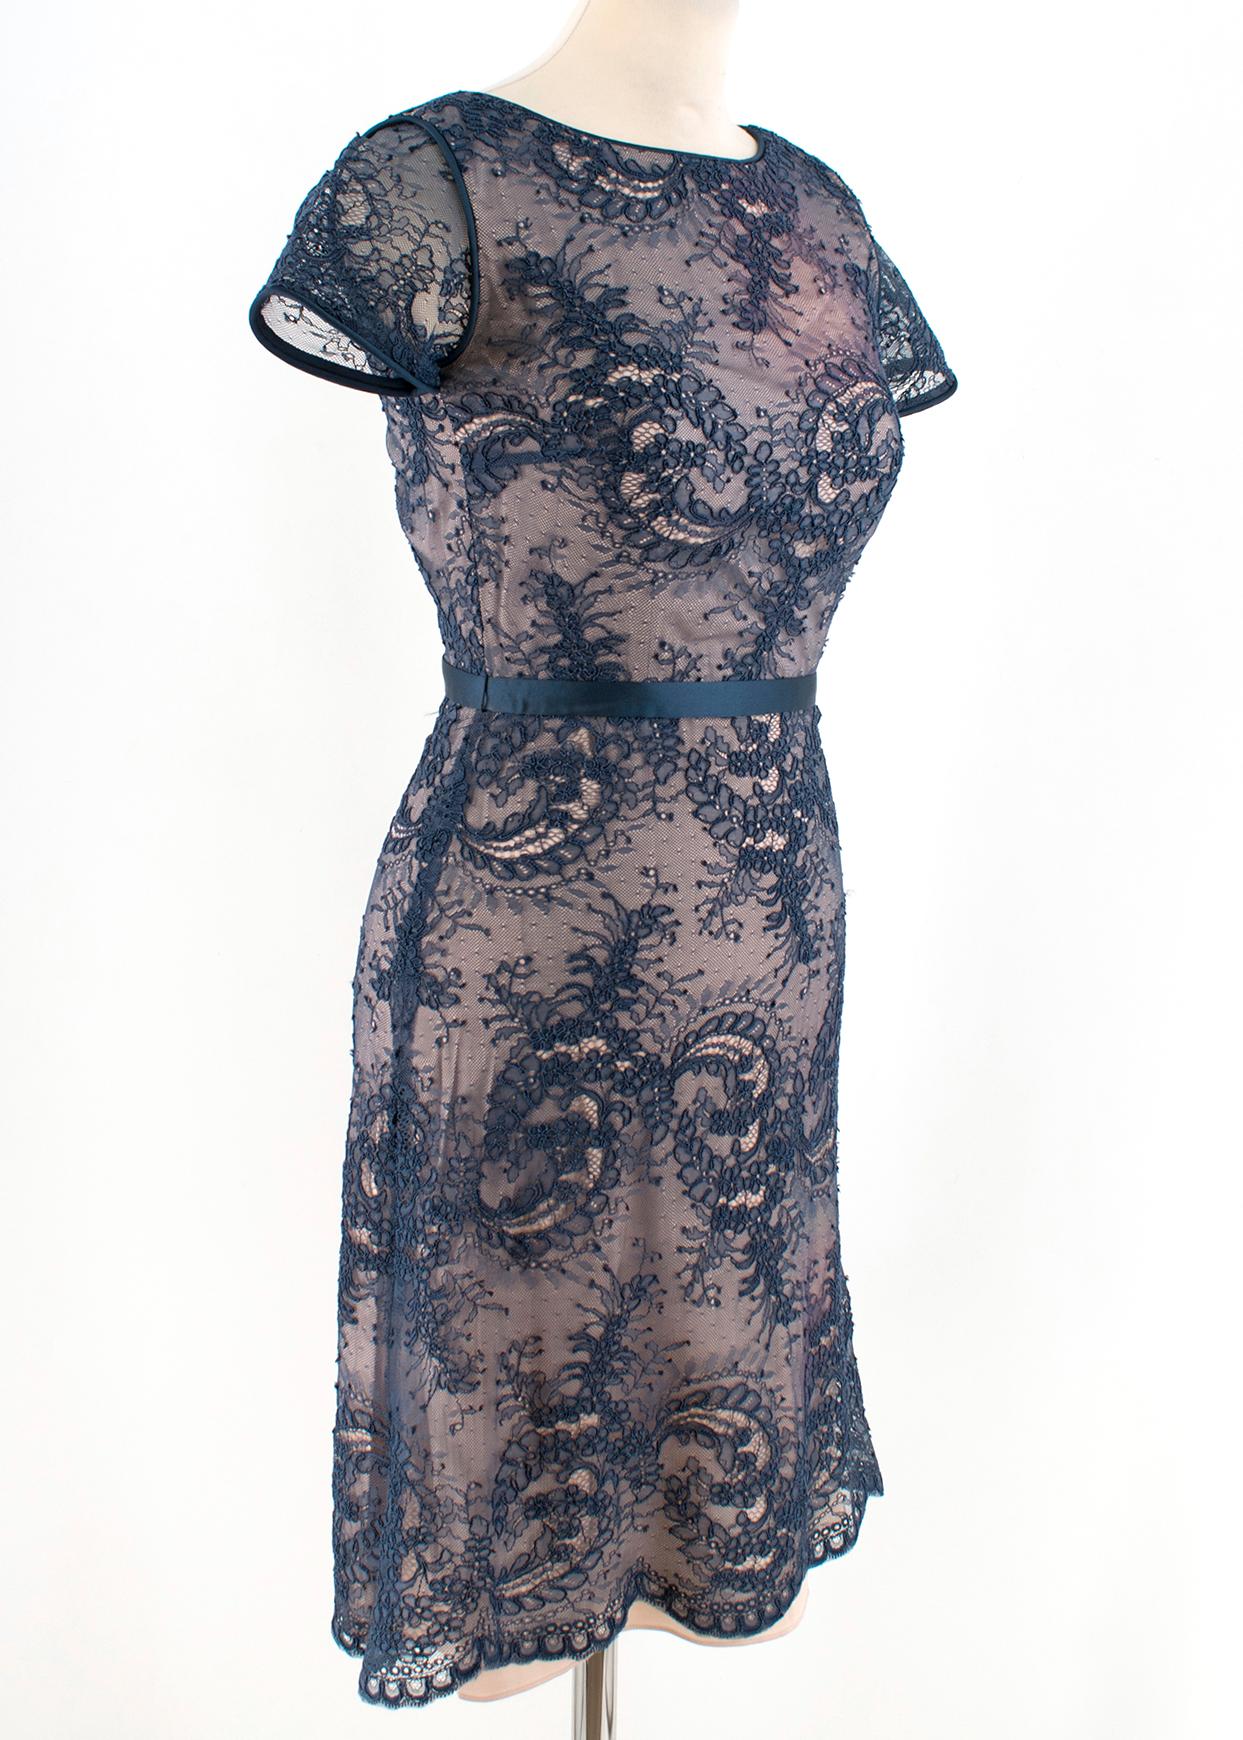 Catherine Deane Belle Lace Short Dress

- Indigo & Almond short dress
- Lace inserts
- Lightweight
- Sheer short sleeved
- Crew neck
- Slightly padded cups
- Centre-back hook-and-eye and zip fastening
- 58% nylon and 42% rayon.

Please note, these